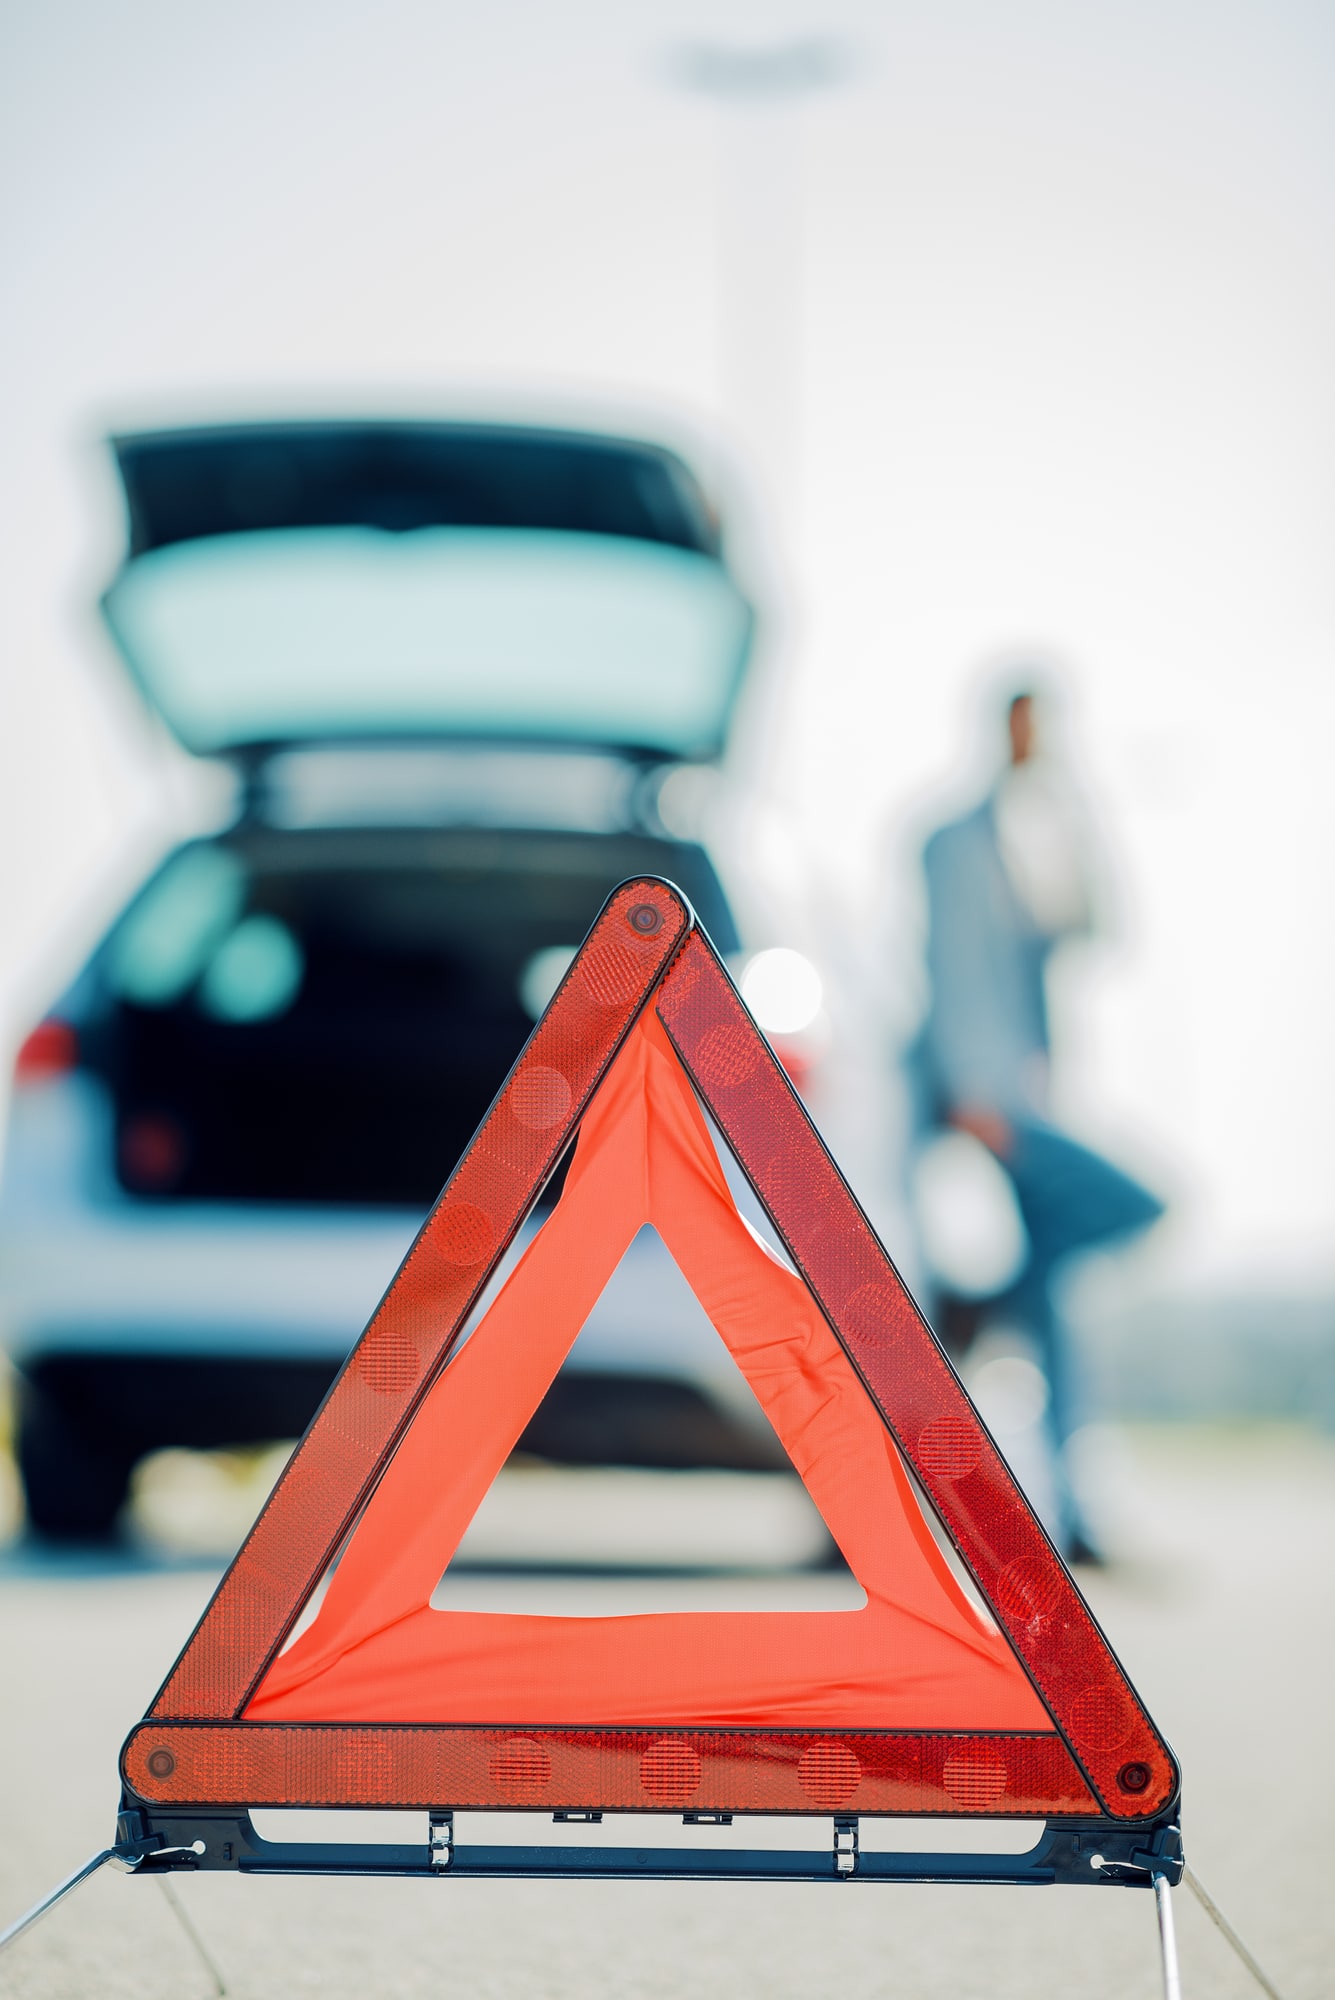 , Stranded on the Road – Things to Keep in Your Car, Days of a Domestic Dad